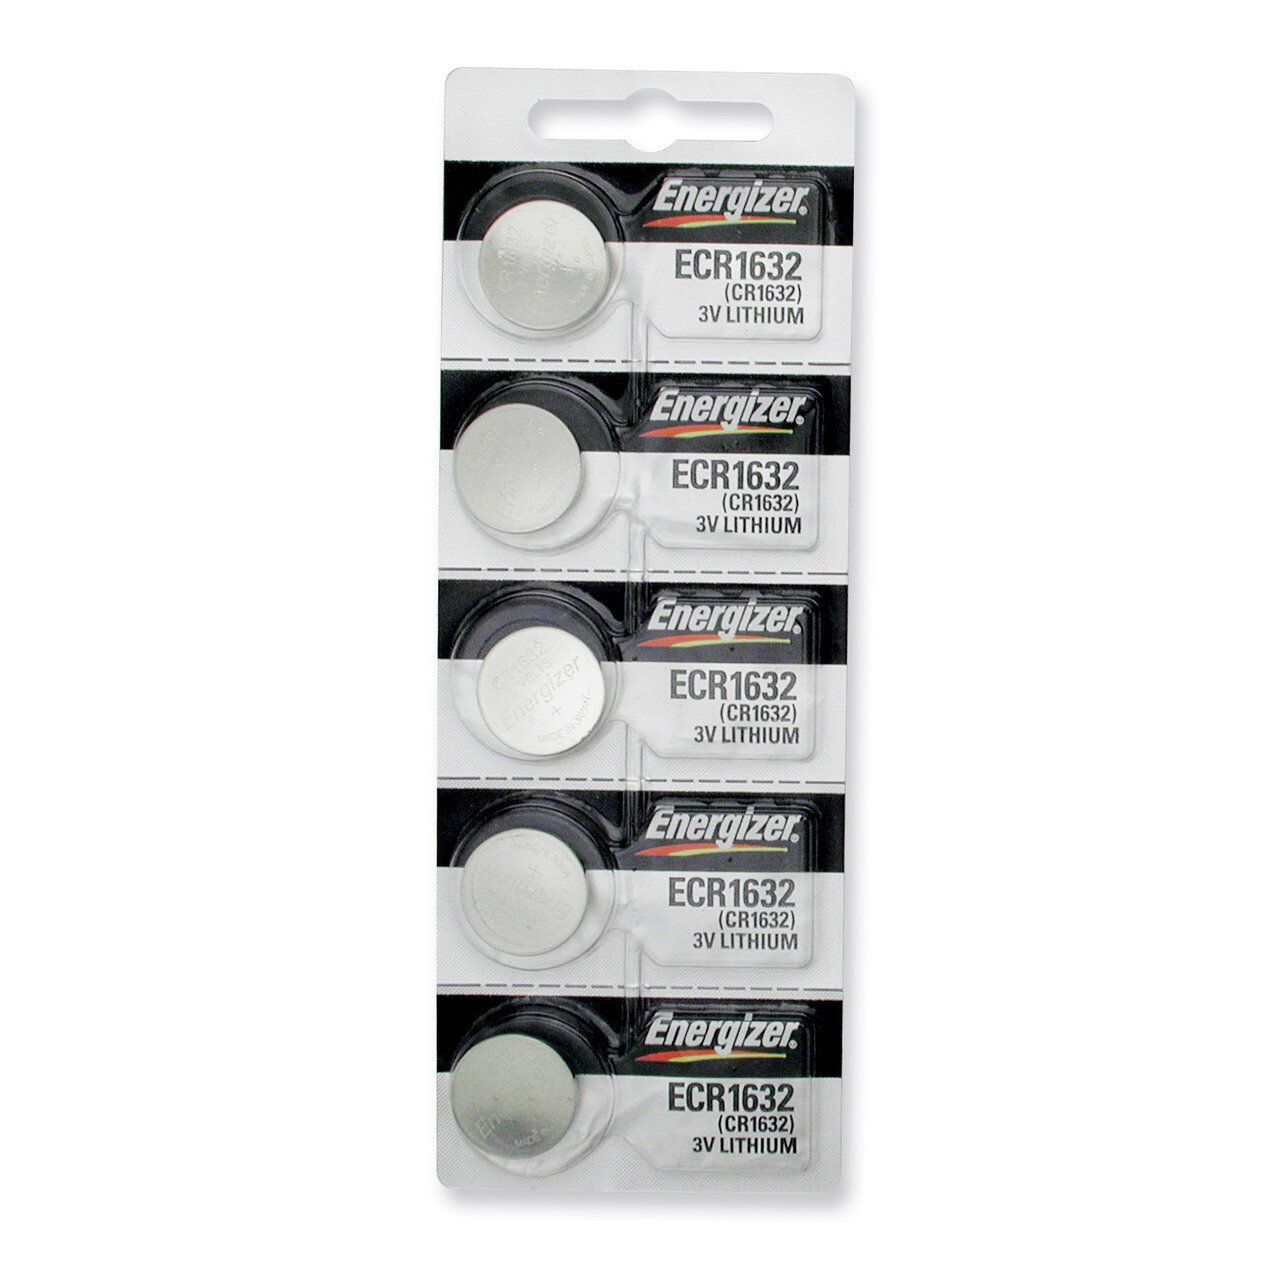 Energizer Lithium Batteries Package of 5 WB1632